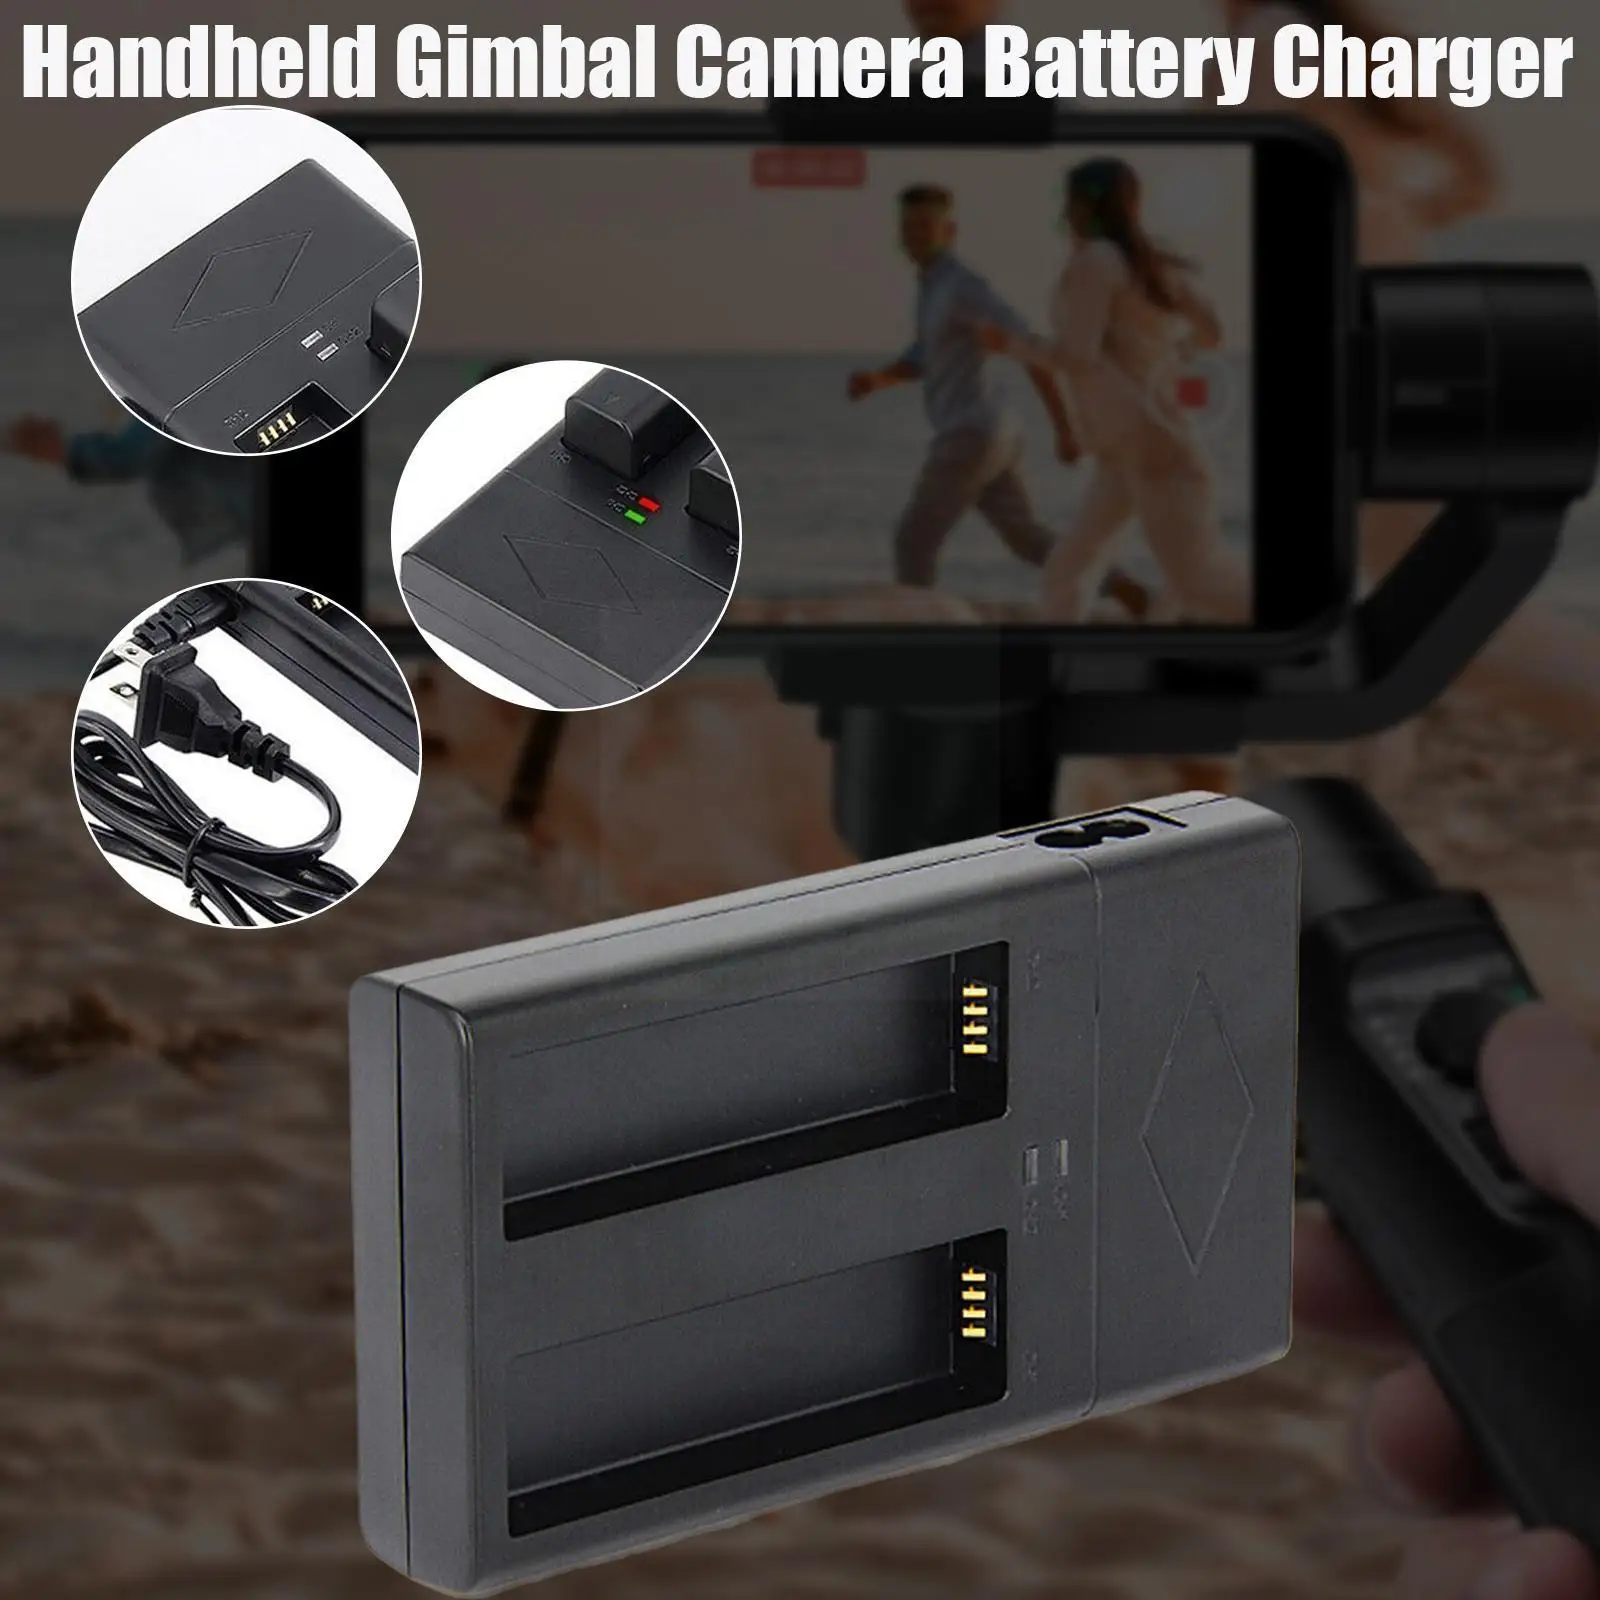 

For Hb01-522365 Battery Dual Charging Charger For Osmo Pro / / Smo X3 X5 X5r Handheld 4k Camera Dual Charge P4r9